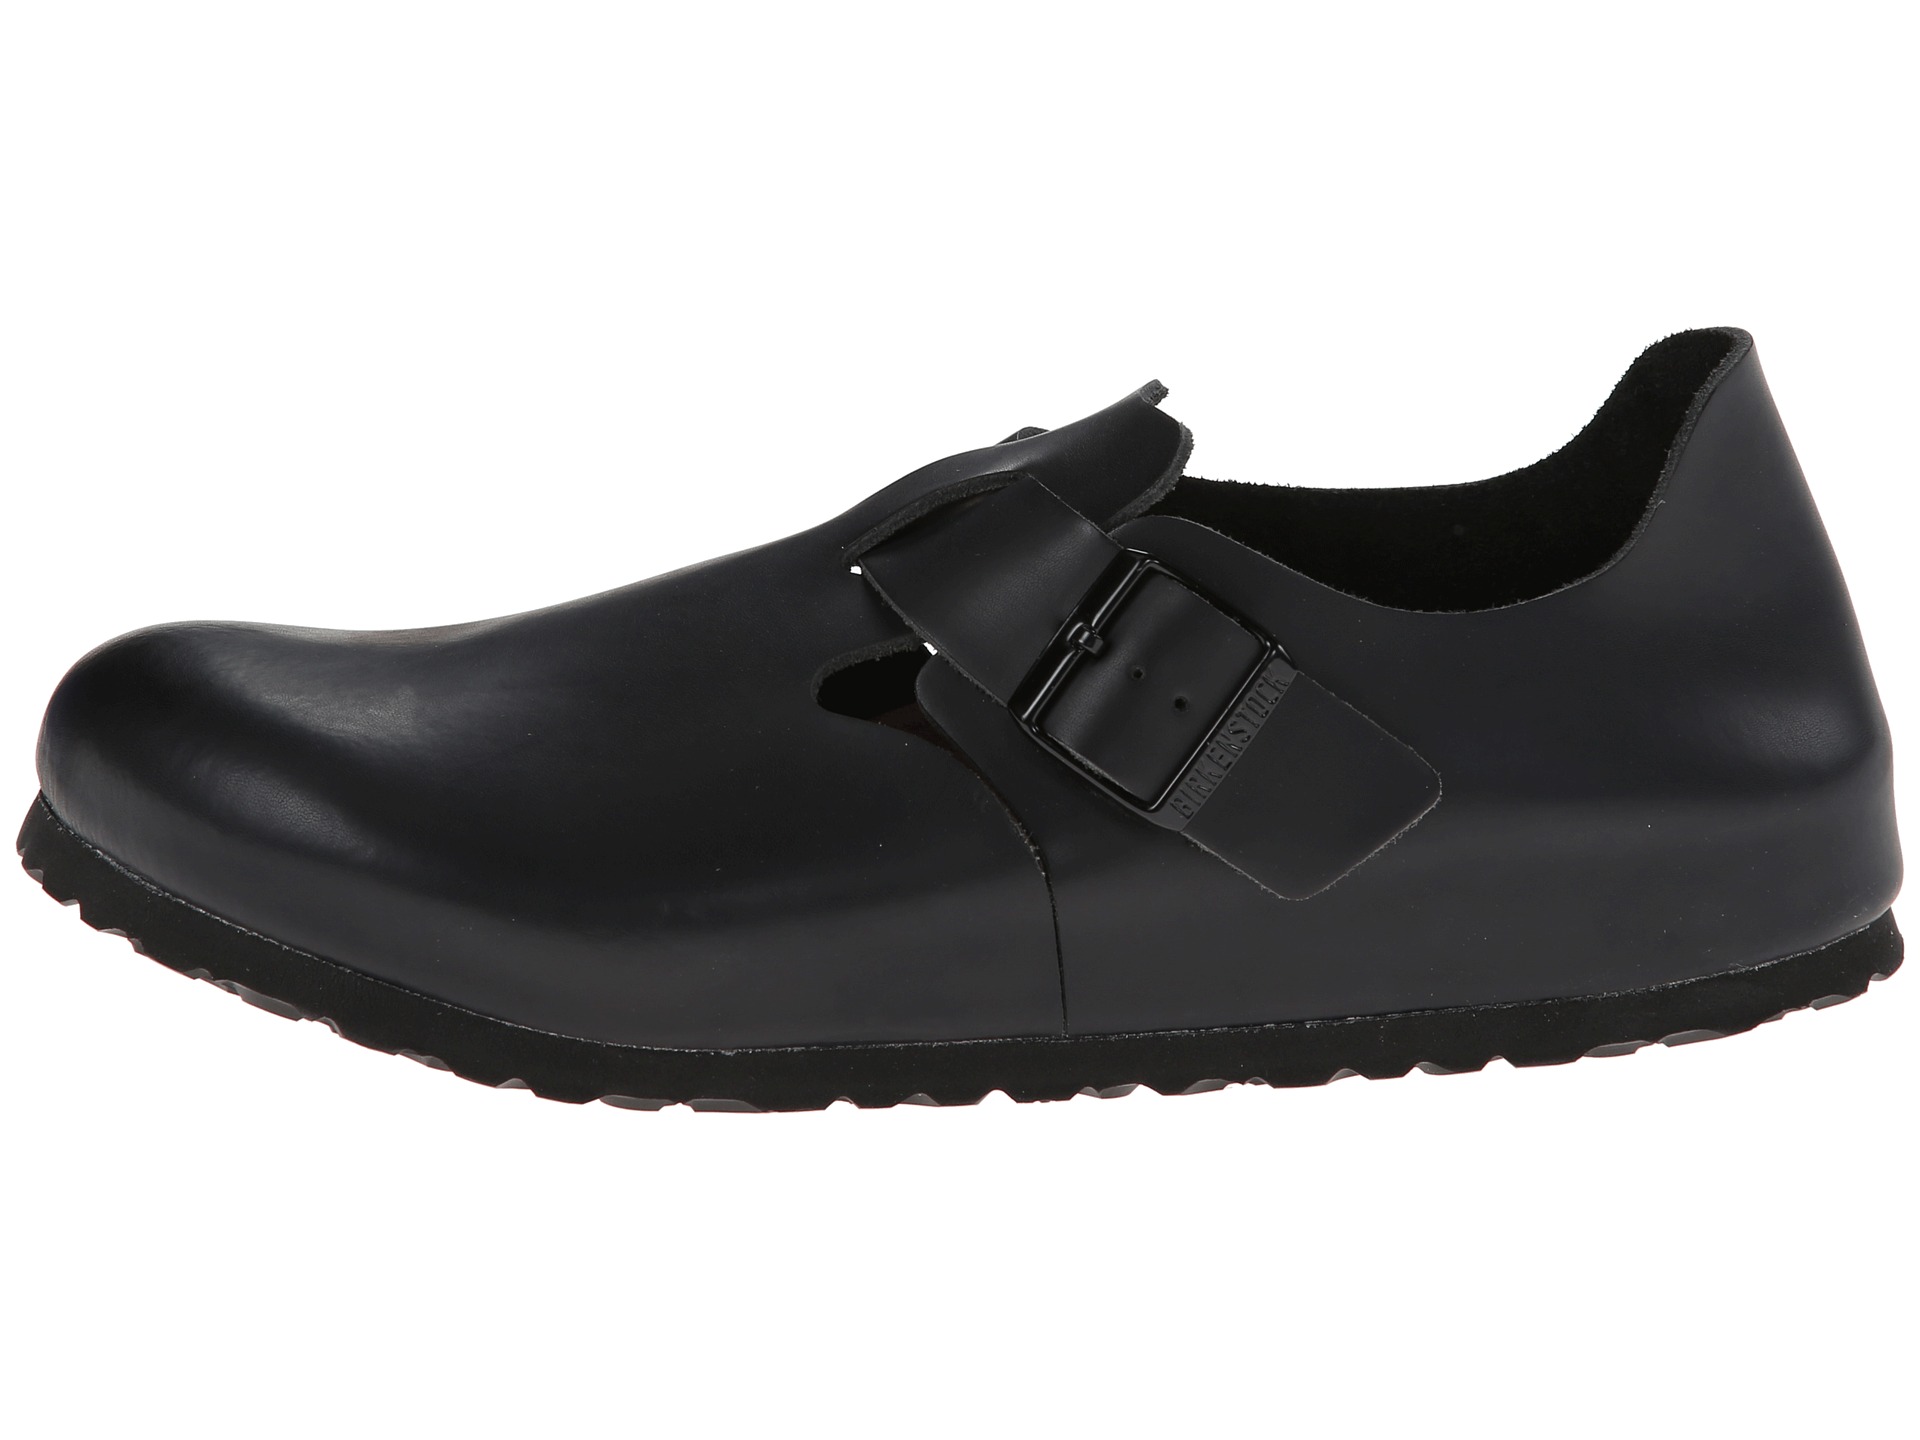 Birkenstock London Soft Footbed - Zappos Free Shipping BOTH Ways